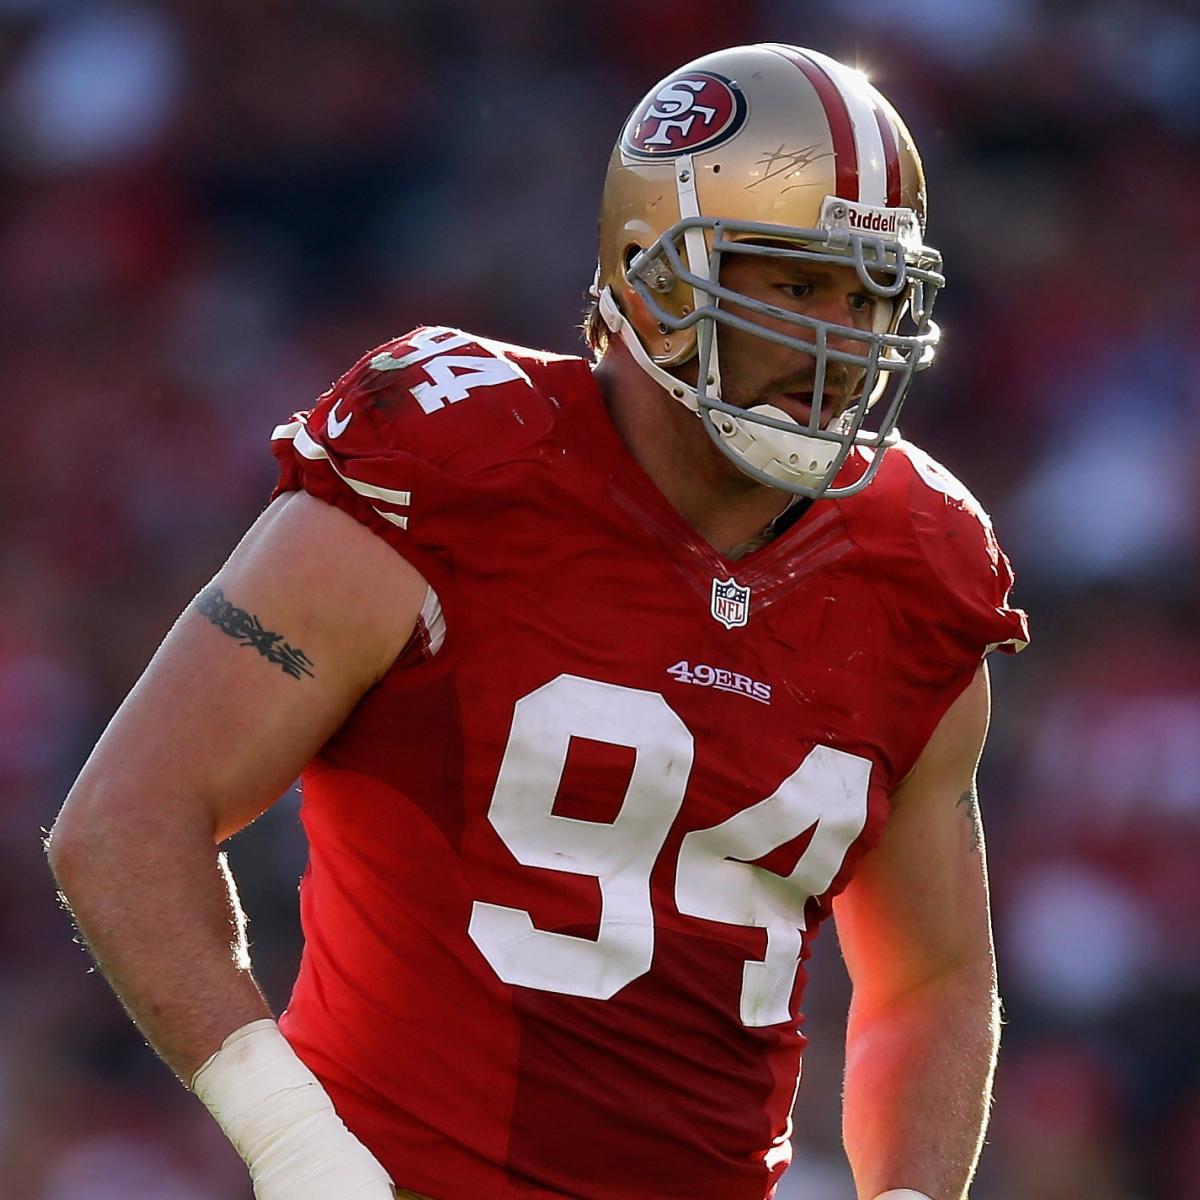 justin smith 49ers jersey